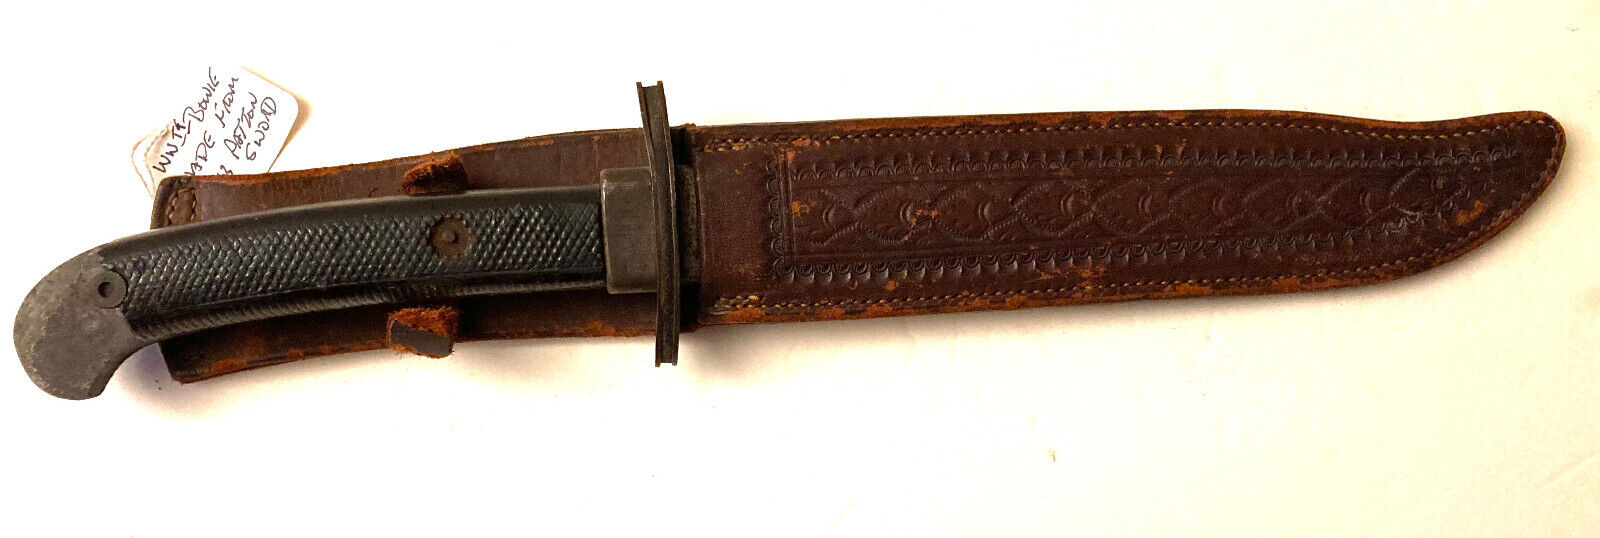 SCARCE WWII BOWIE KNIFE MADE FROM A 1913 PATTON SWORD WITH SCABBARD